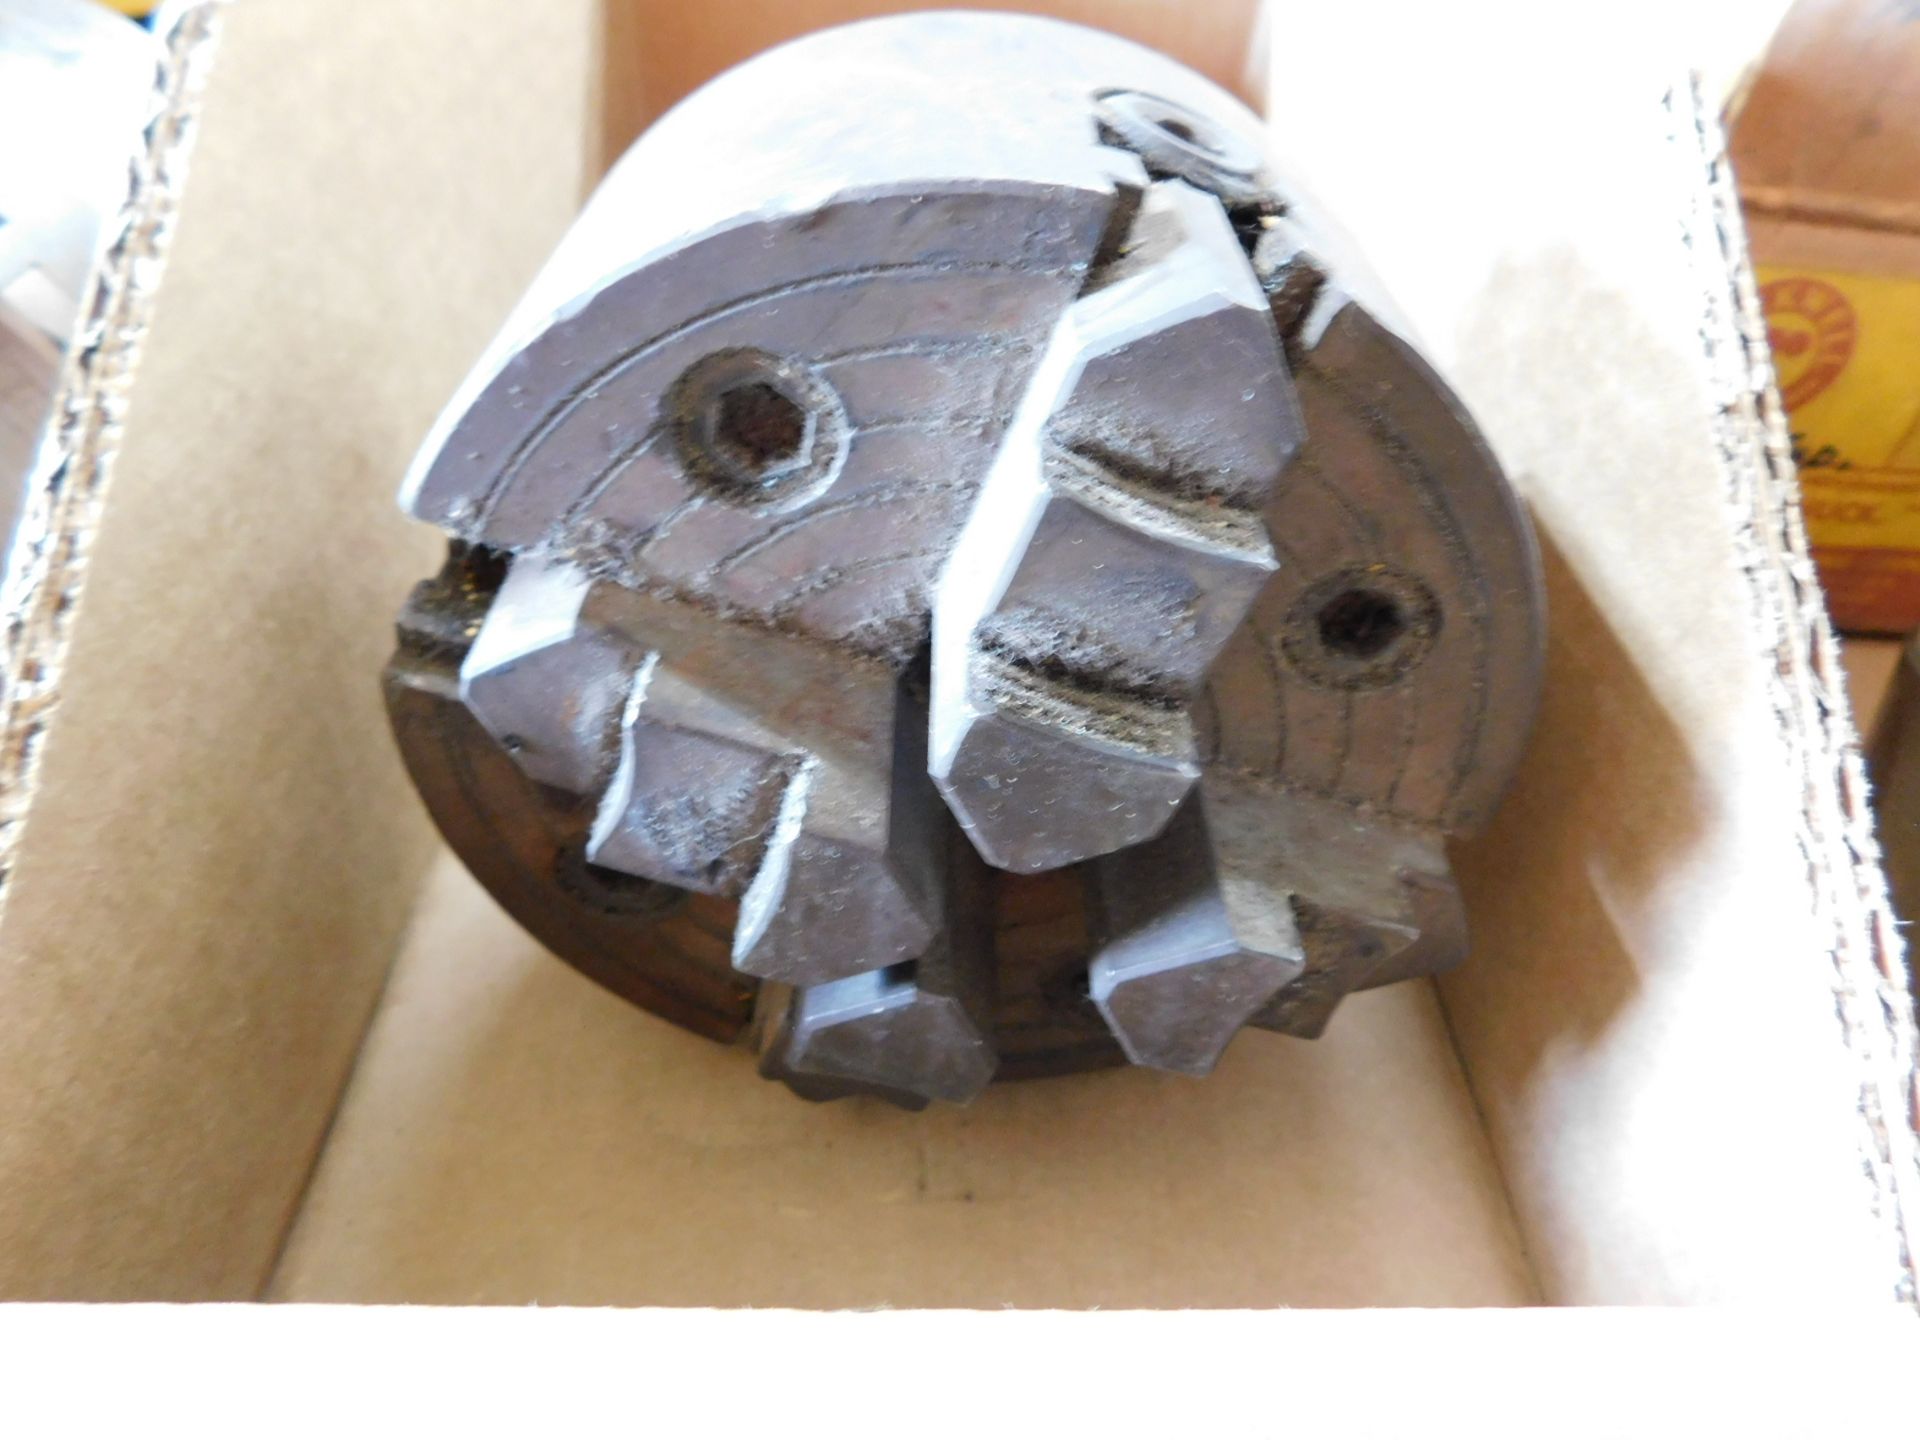 4 1/2" 4-Jaw Chuck with Tapered Shank Adaptor